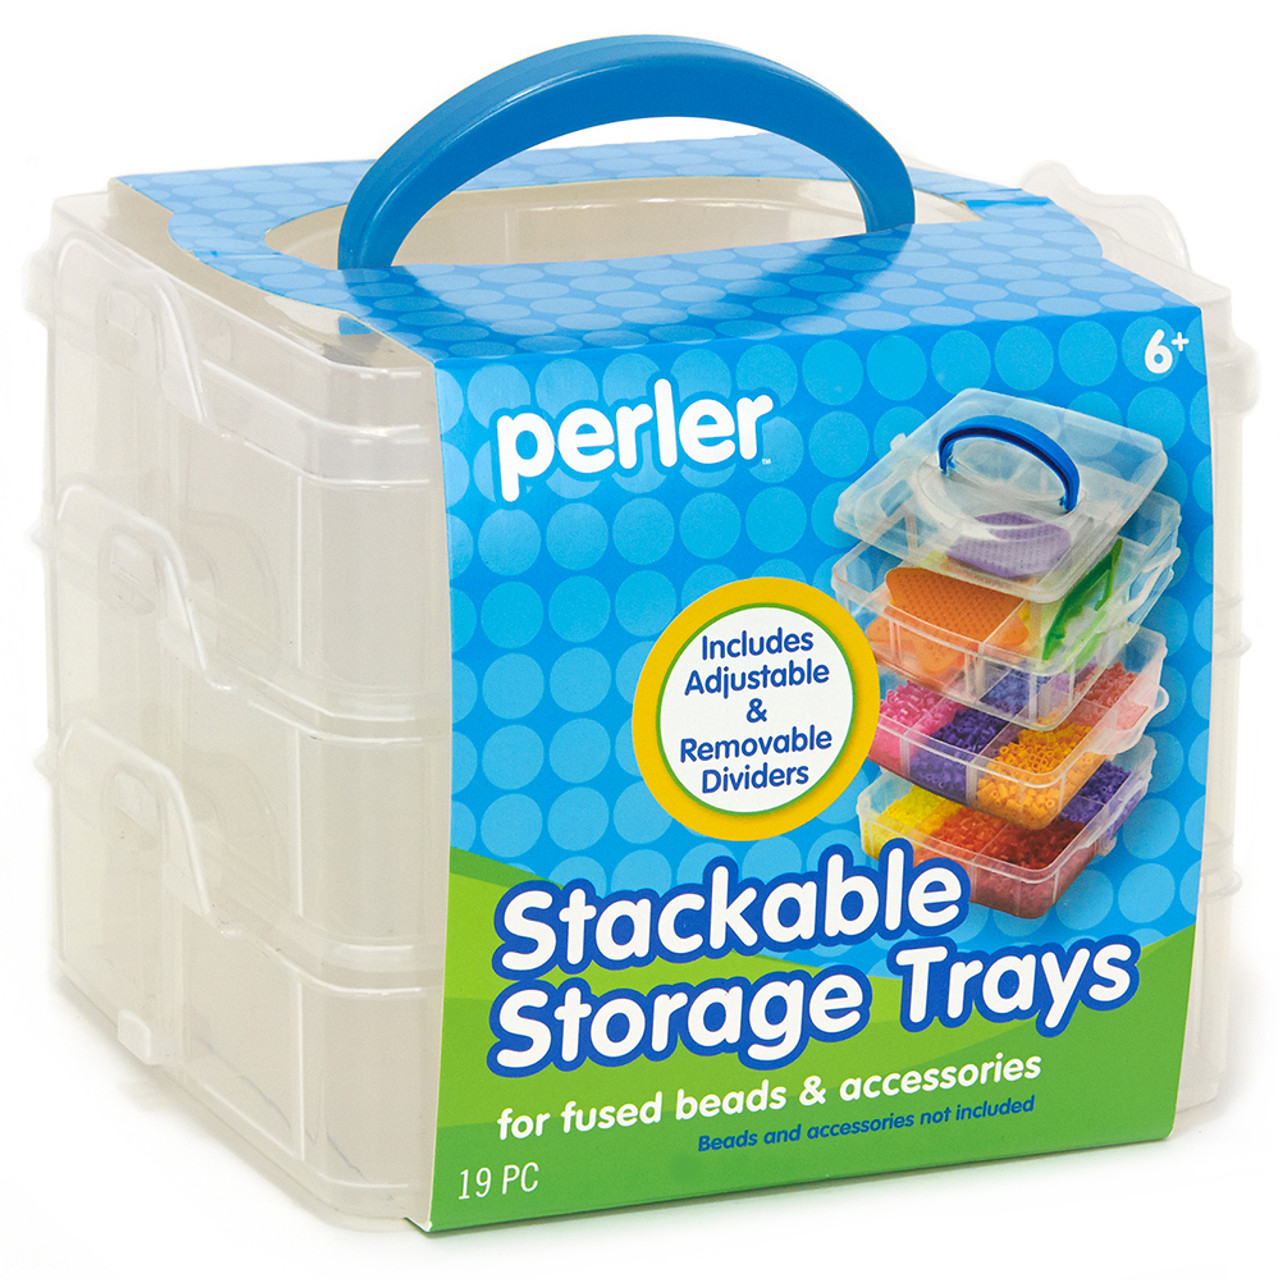 Stackable Storage Trays